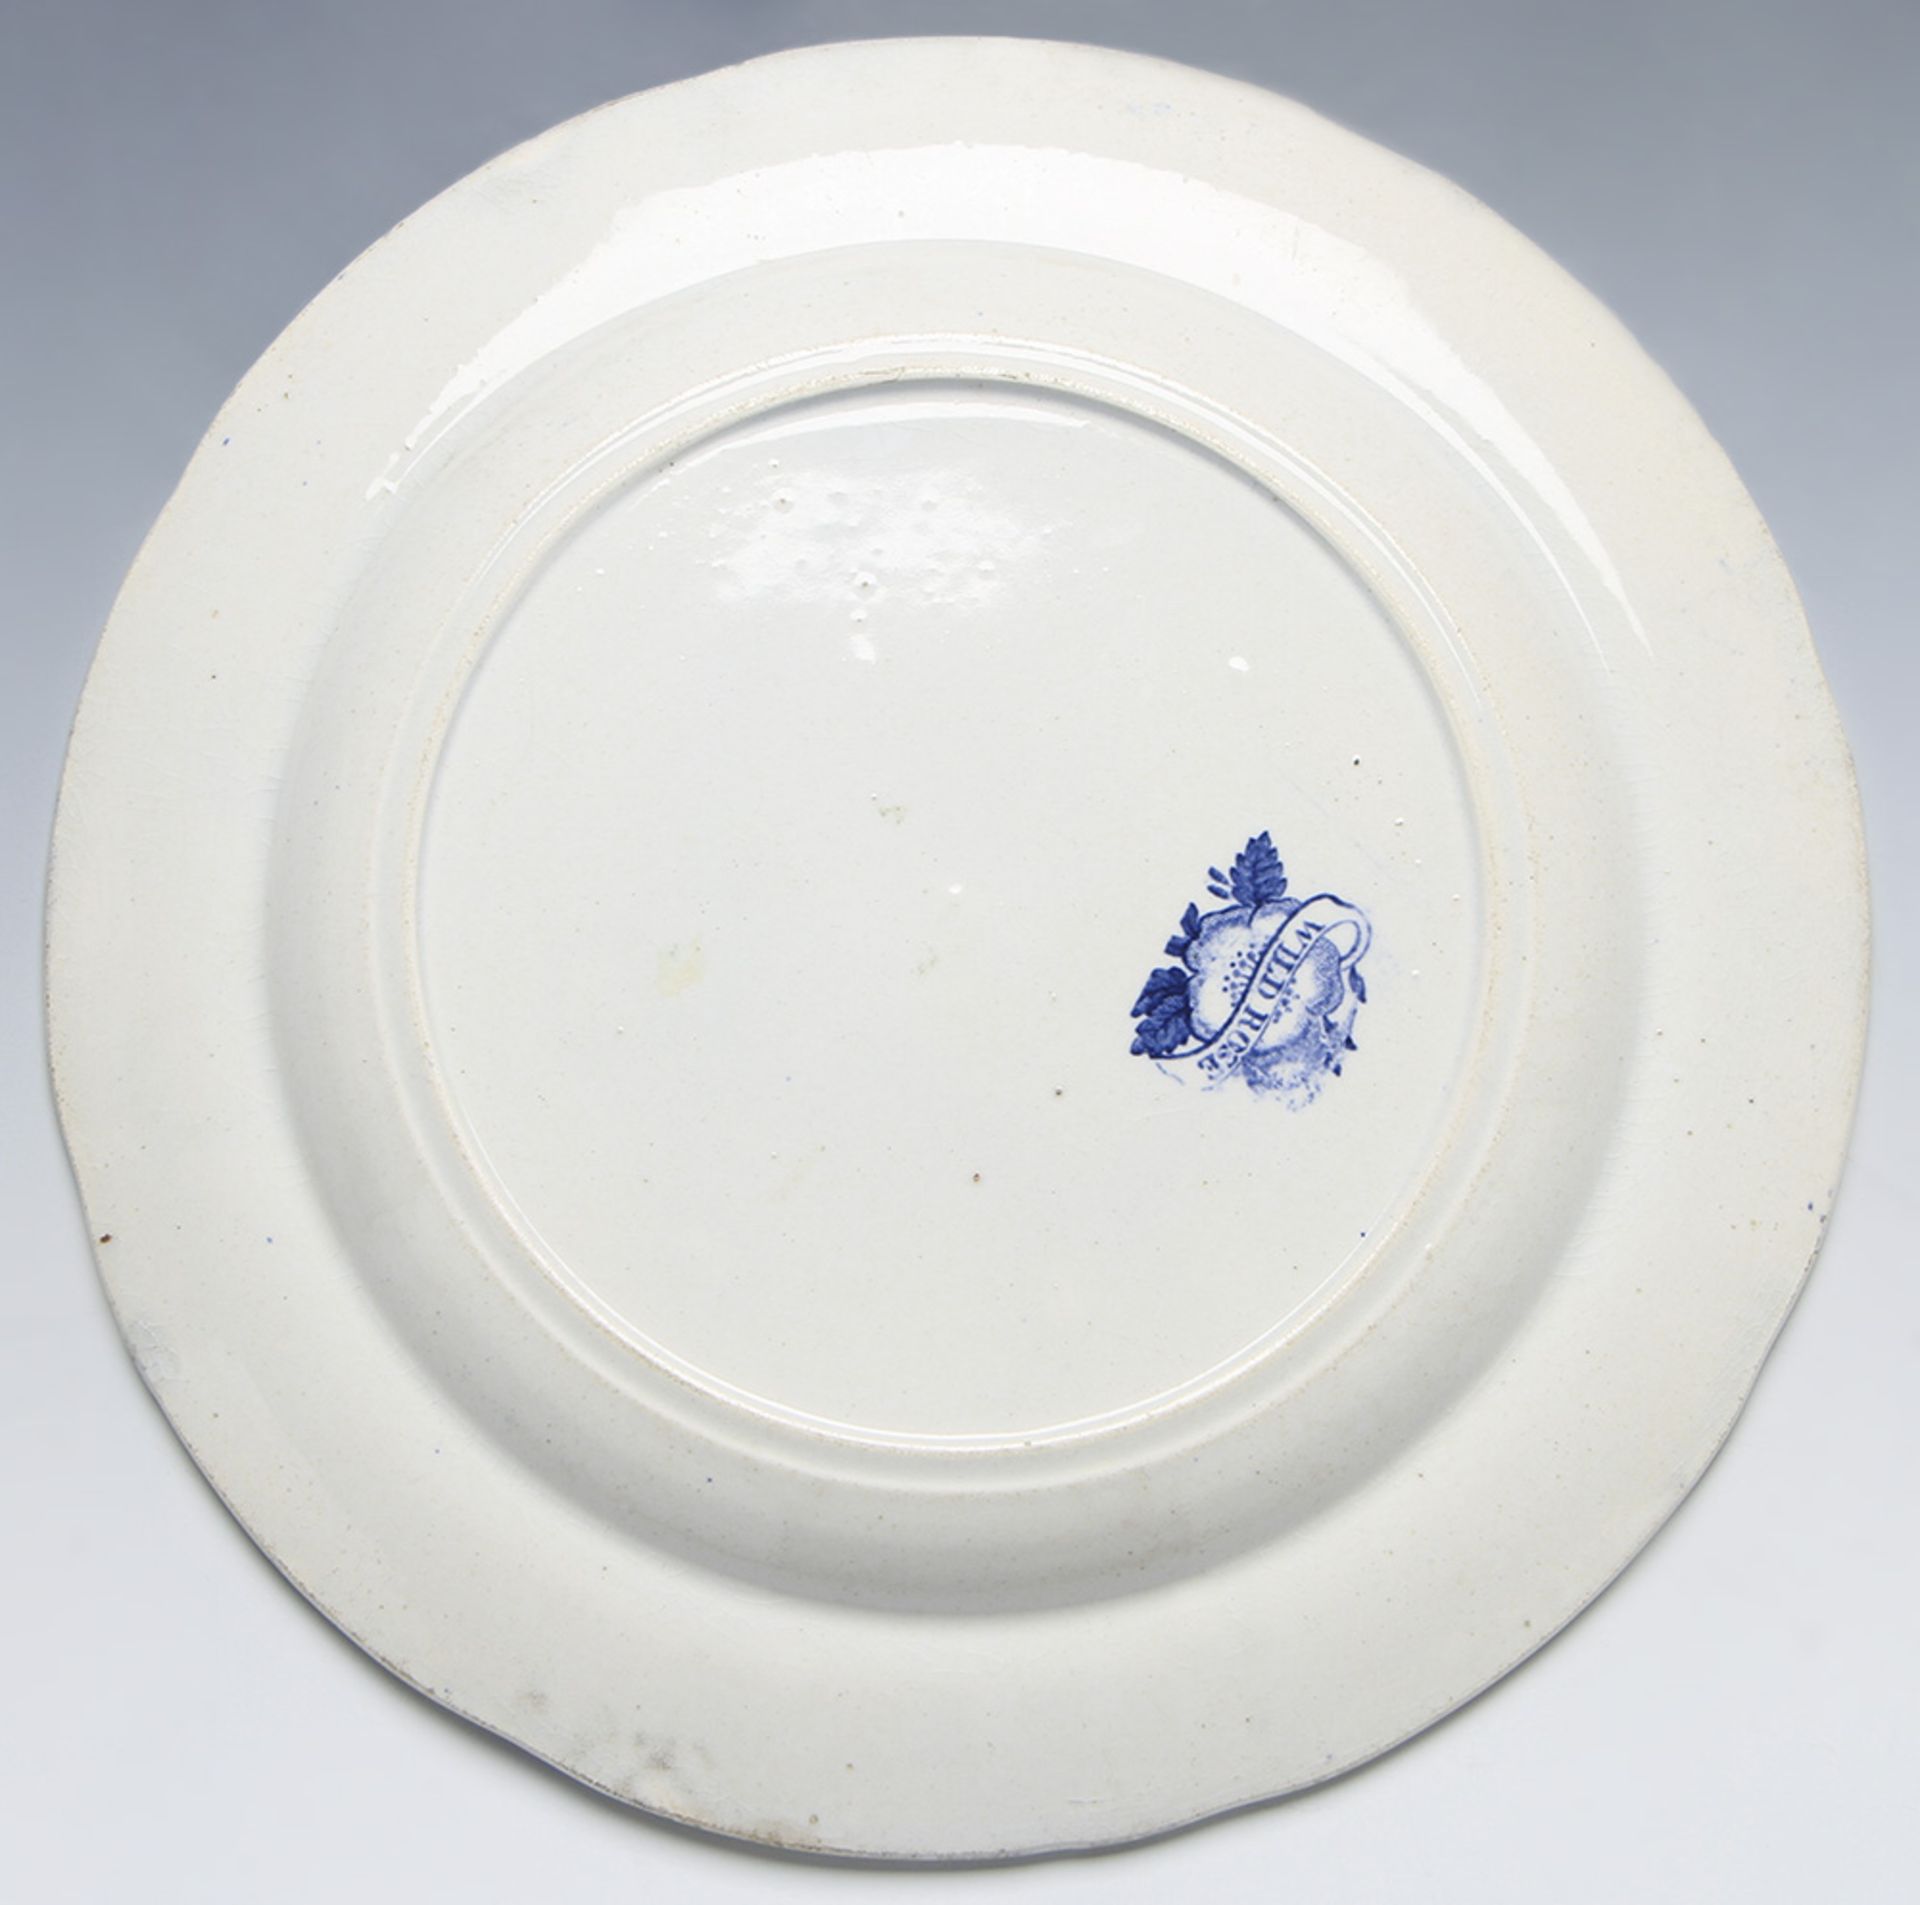 ANTIQUE STAFFORDSHIRE WILD ROSE BLUE & WHITE PLATE c.1830 - Image 4 of 11